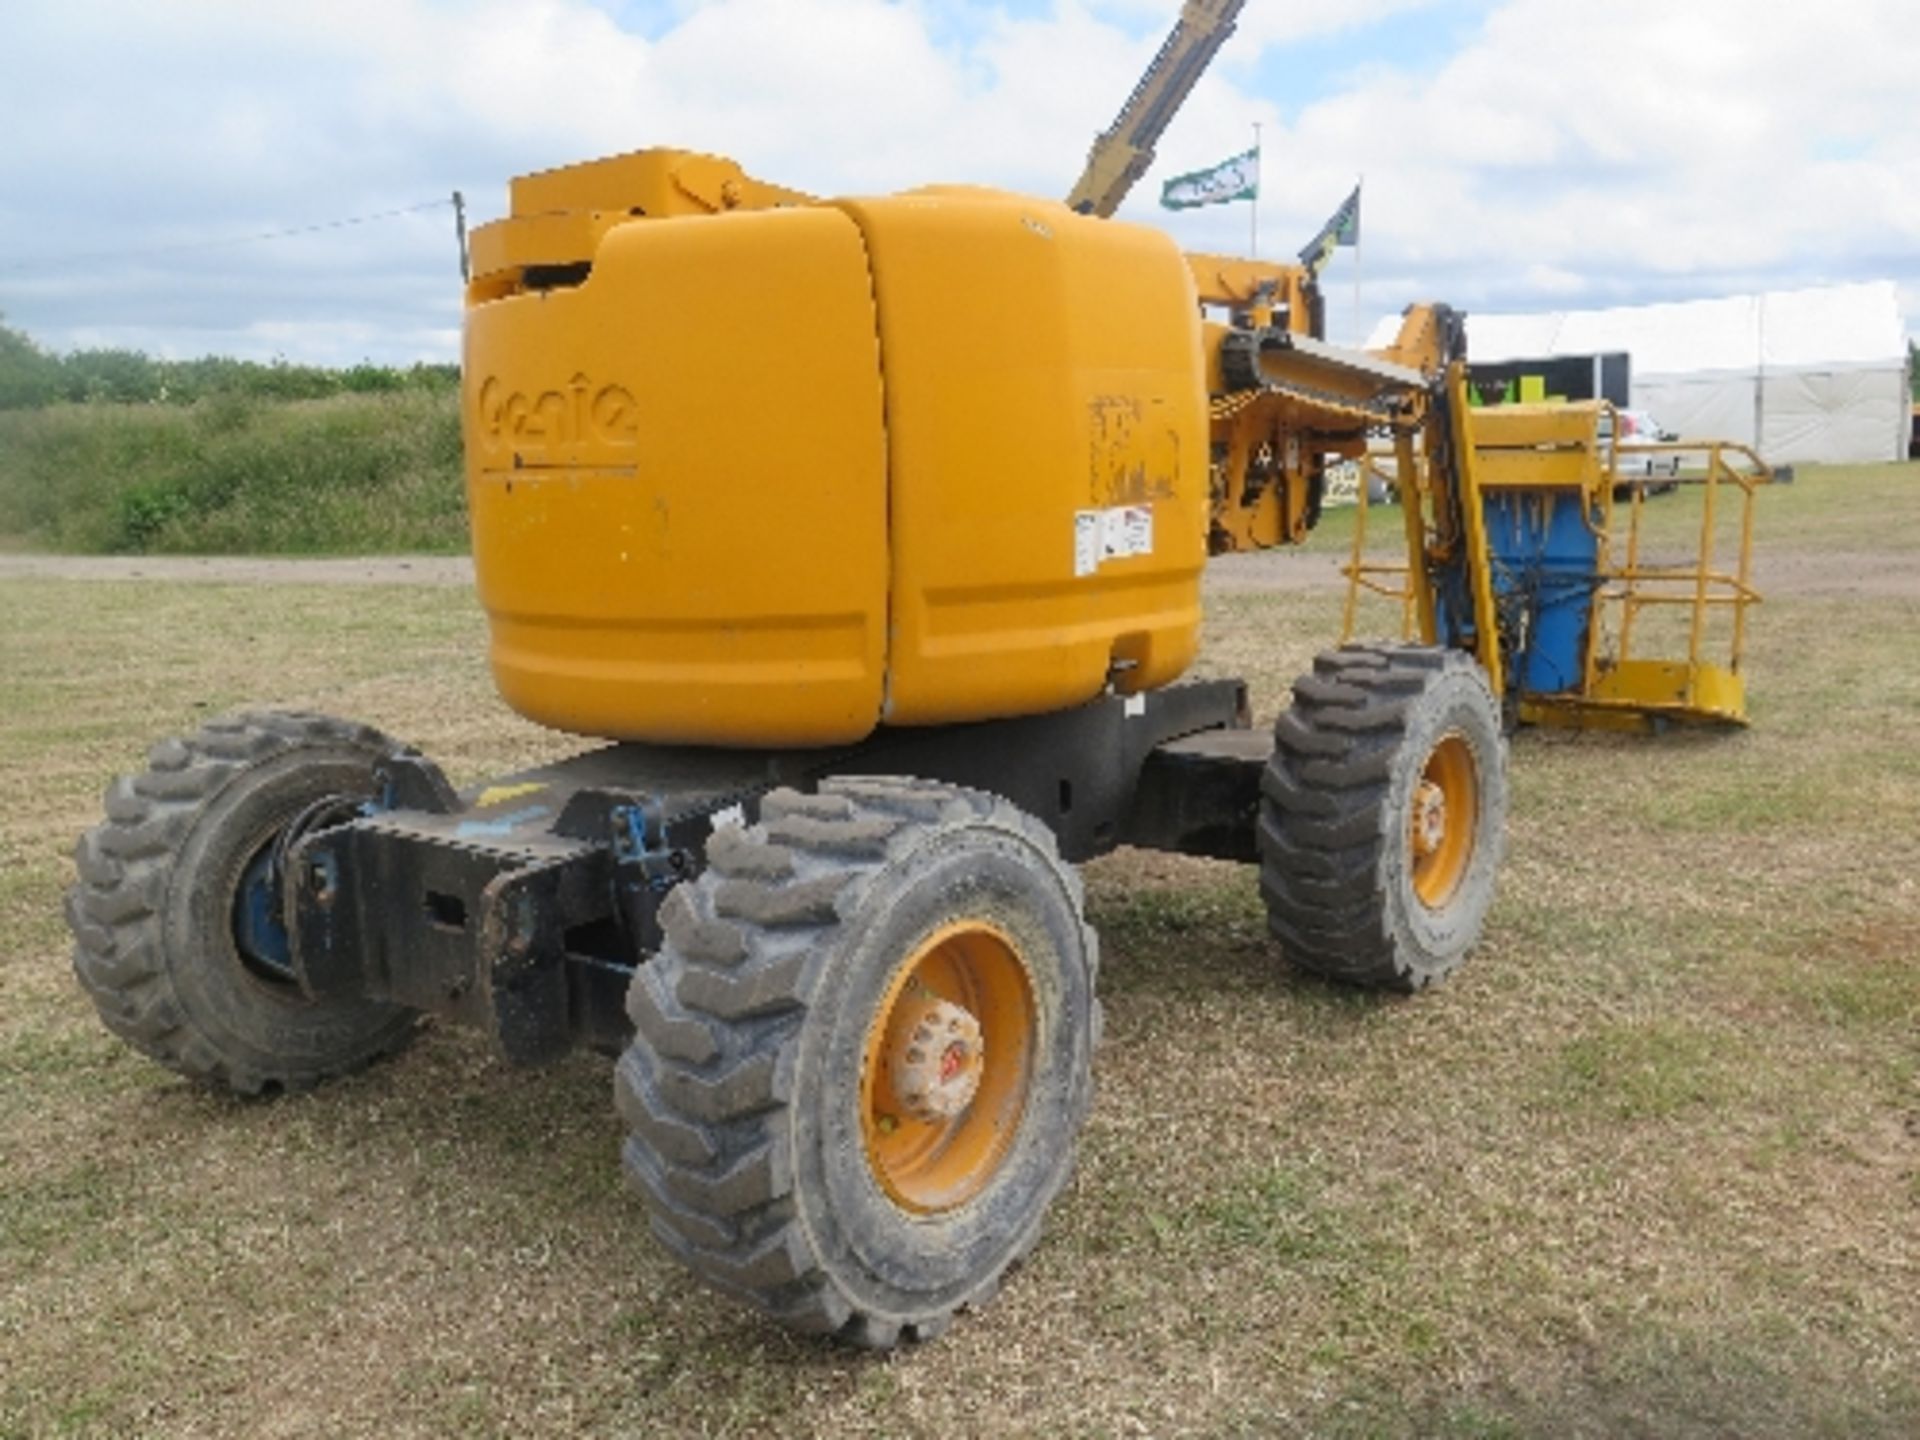 Genie Z45/25 artic boom 2003 AB723
2,790 HOURS
ALL LOTS are SOLD AS SEEN WITHOUT WARRANTY